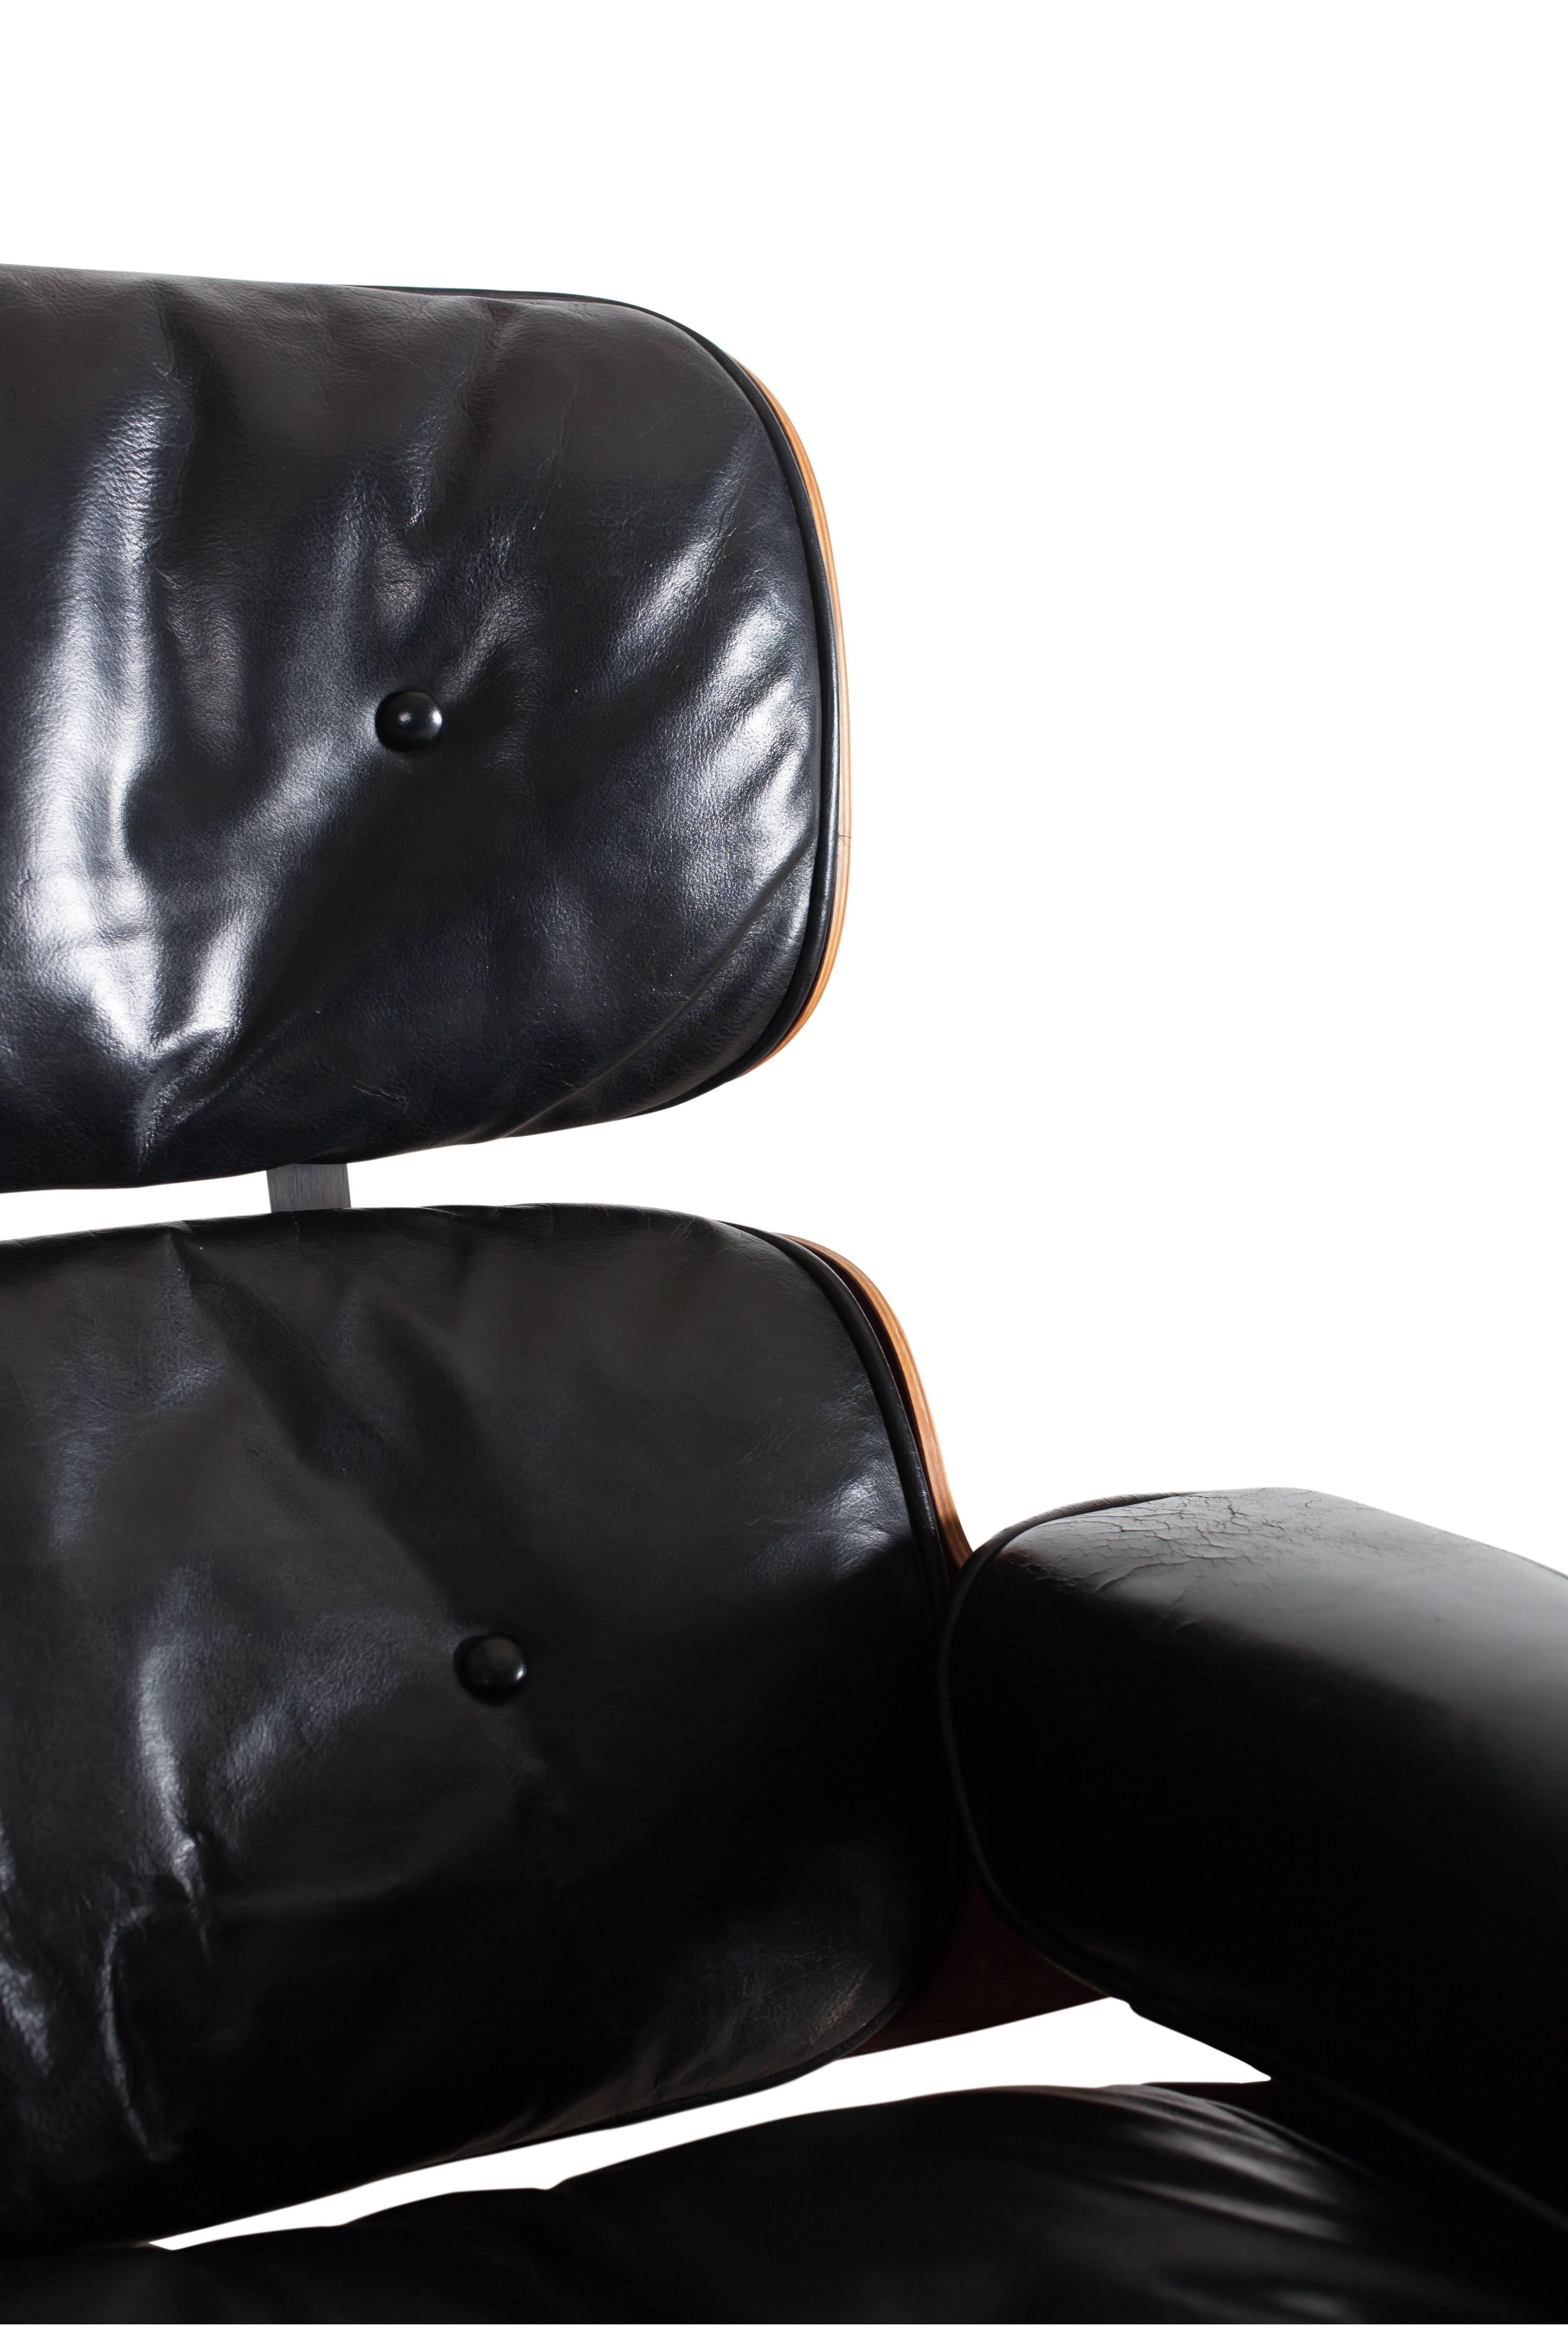 Mid-20th Century Eames Lounge Chair & Ottoman - 1st Edition